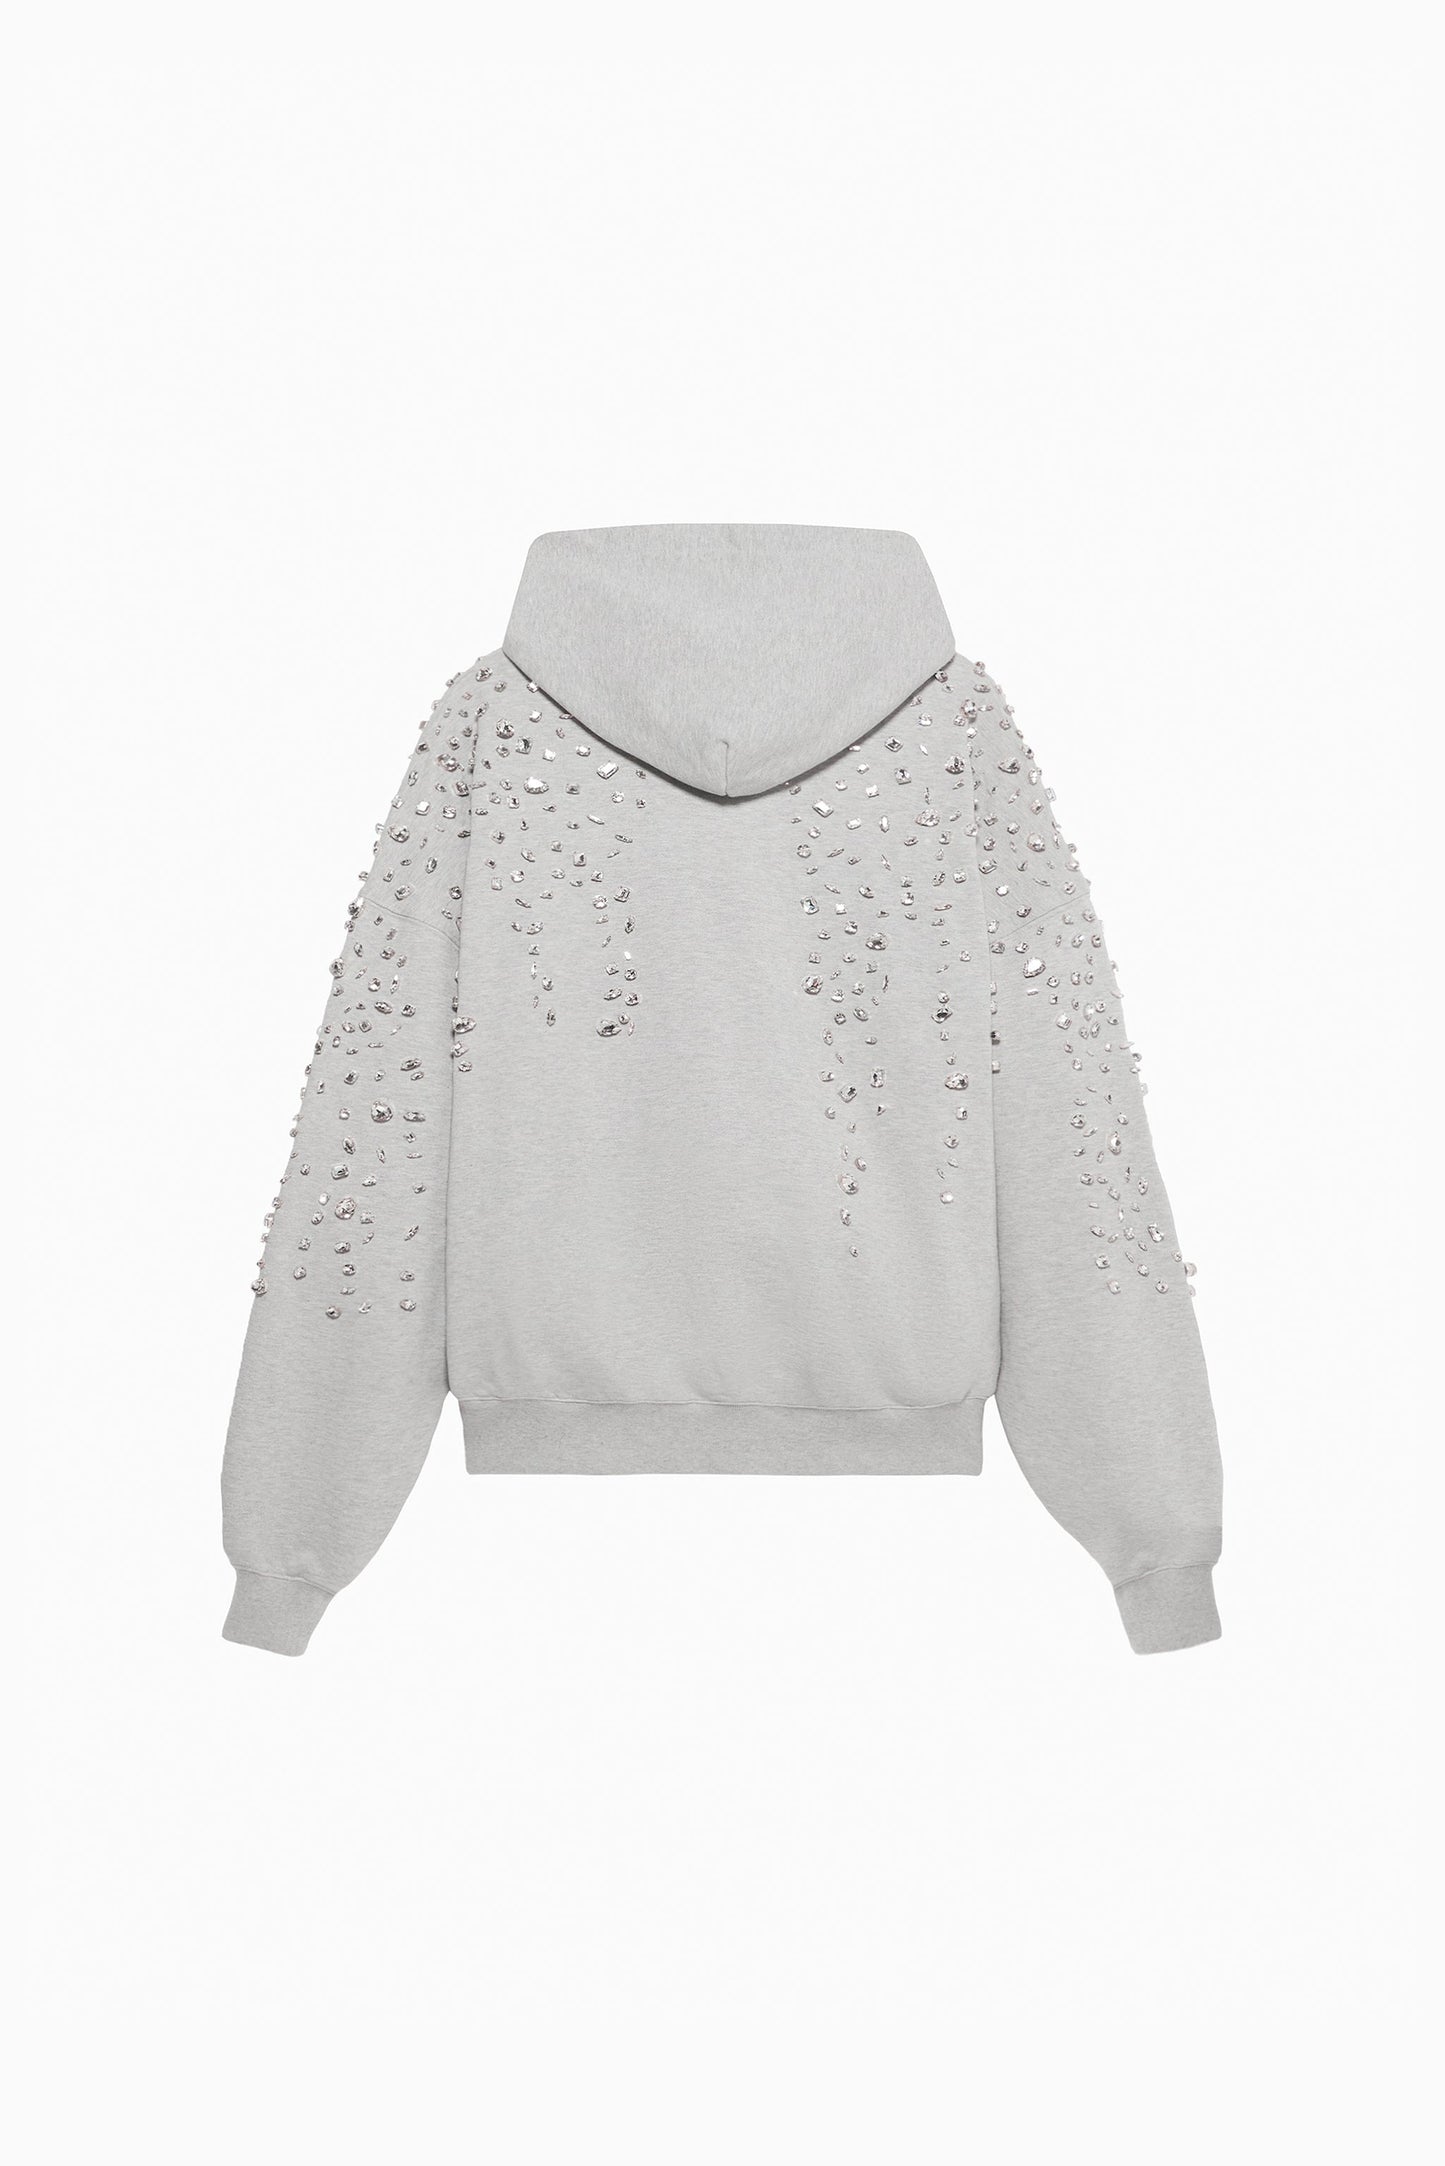 Woman's Crystals Embroidered Sweatshirt